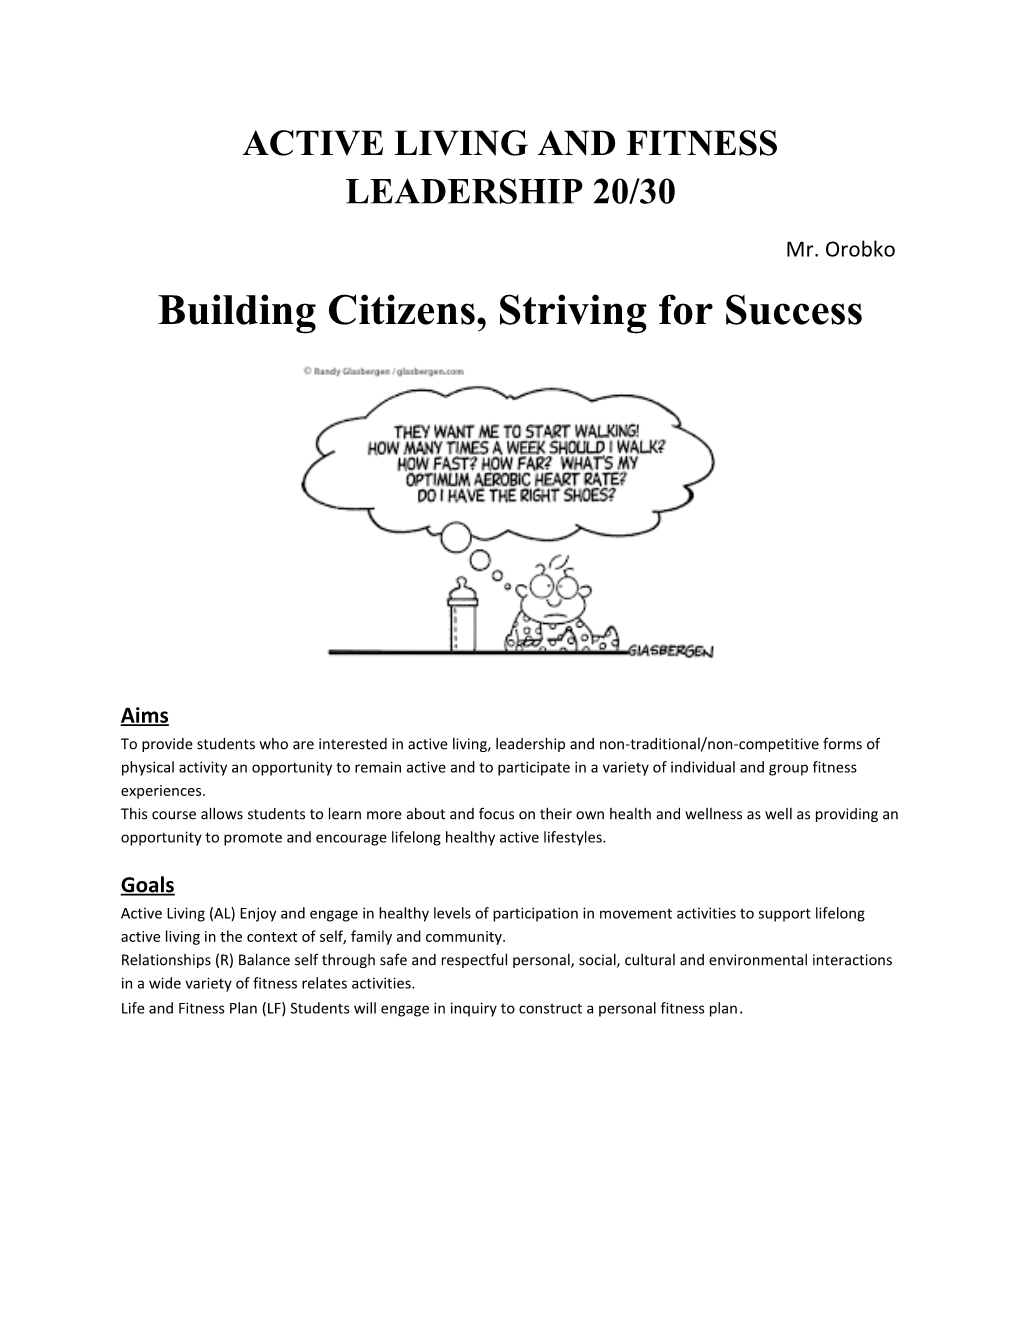 Active Living and Fitness Leadership20/30